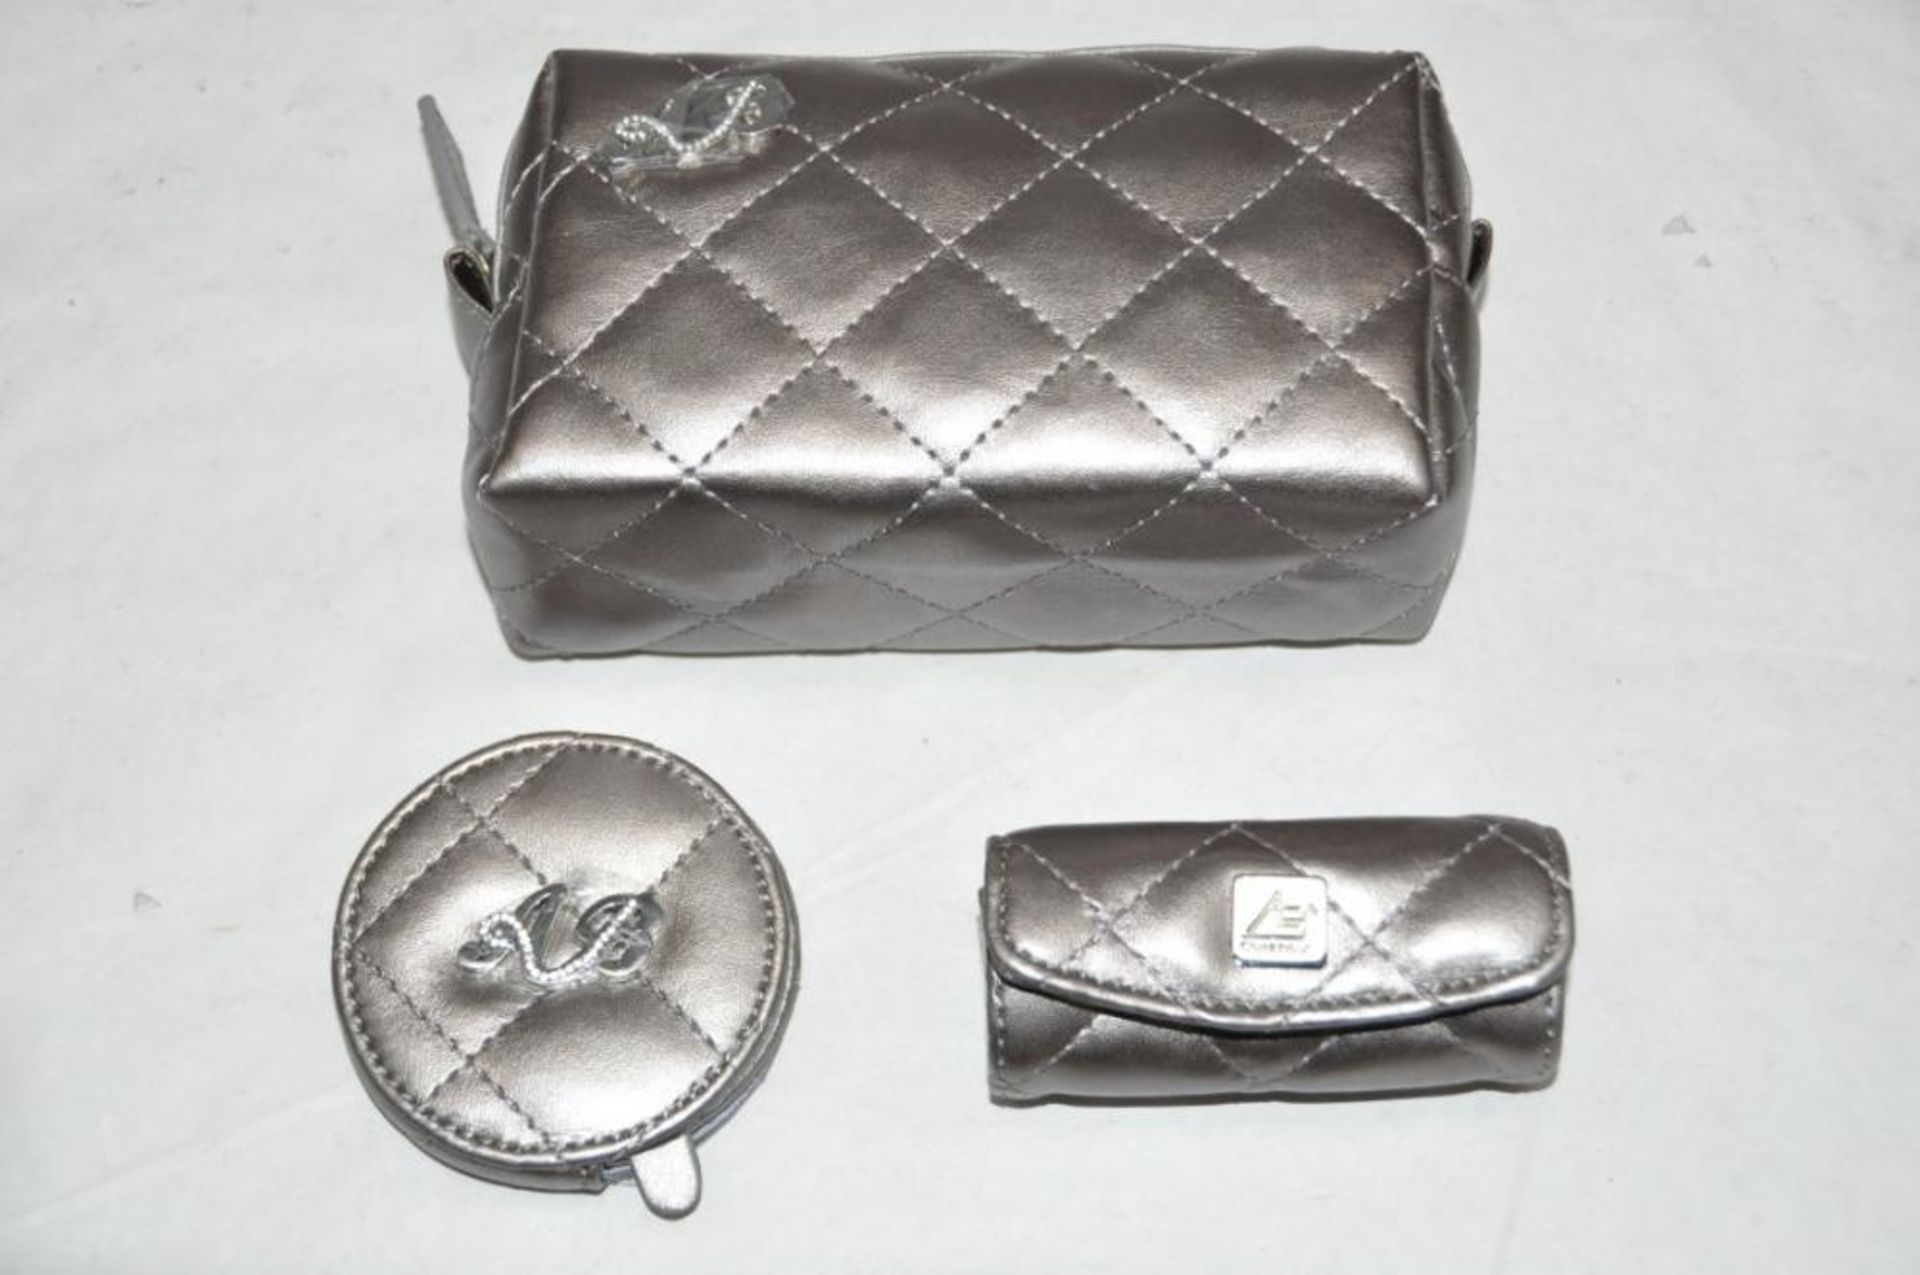 1 x "AB Collezioni" Italian Luxury 3pc Matching Gift Set - Includes Make Up Bag, Round Mirror, and - Image 6 of 6